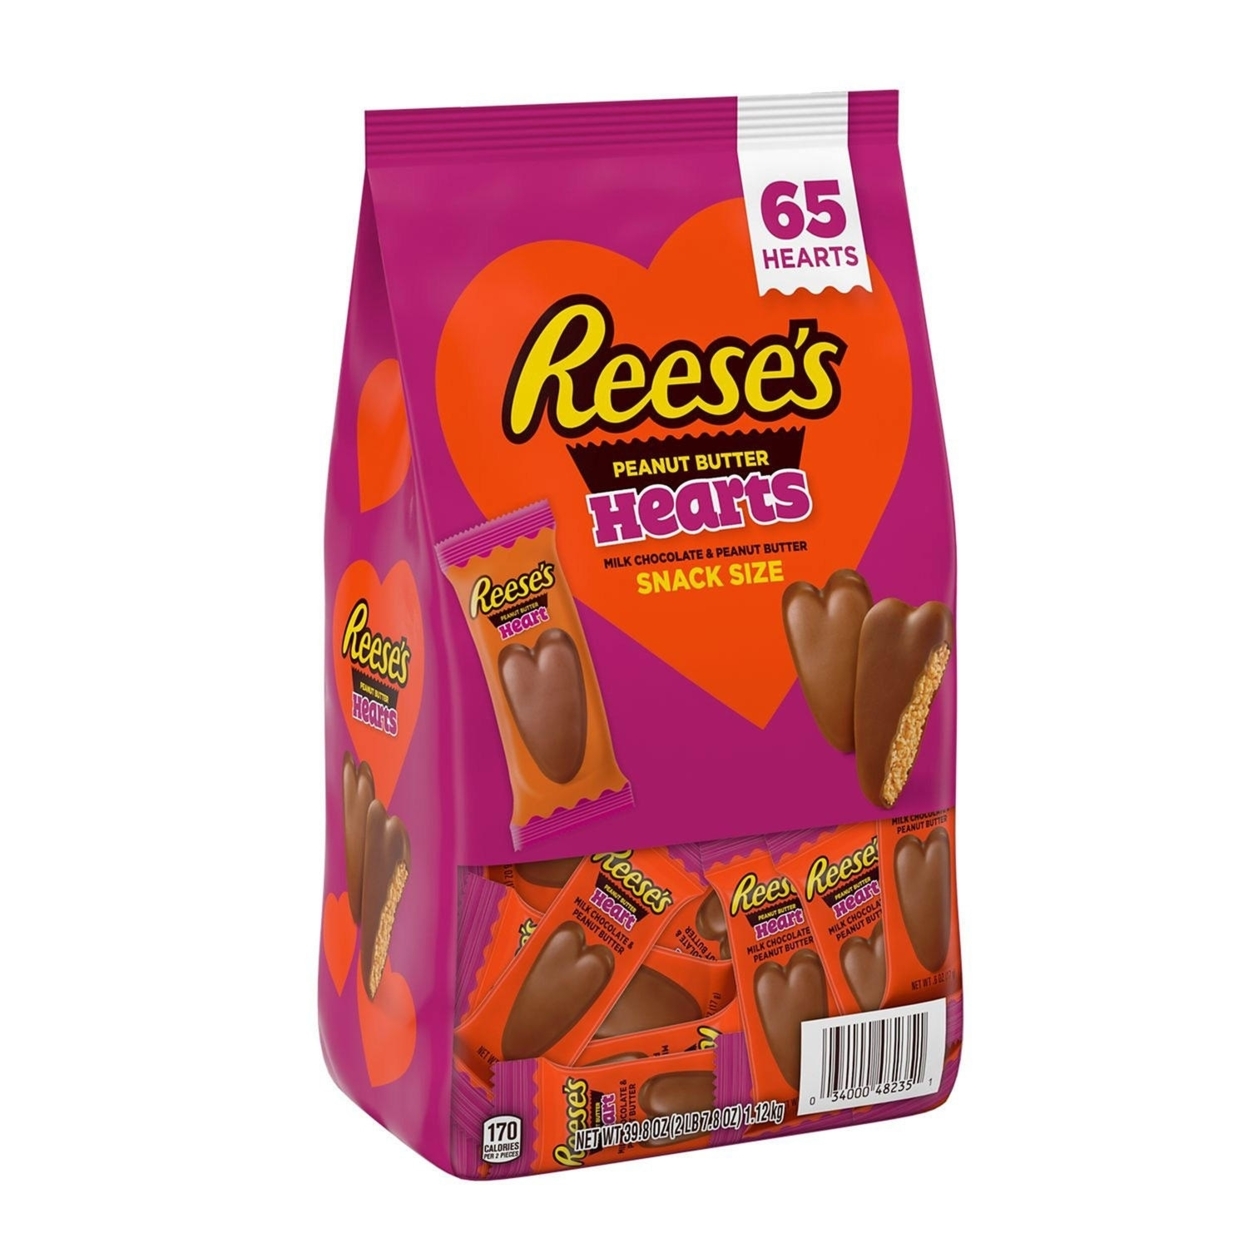 Reese's Milk Chocolate Peanut Butter Valentine's Hearts Candy, (39.8 Oz, 65 Ct)